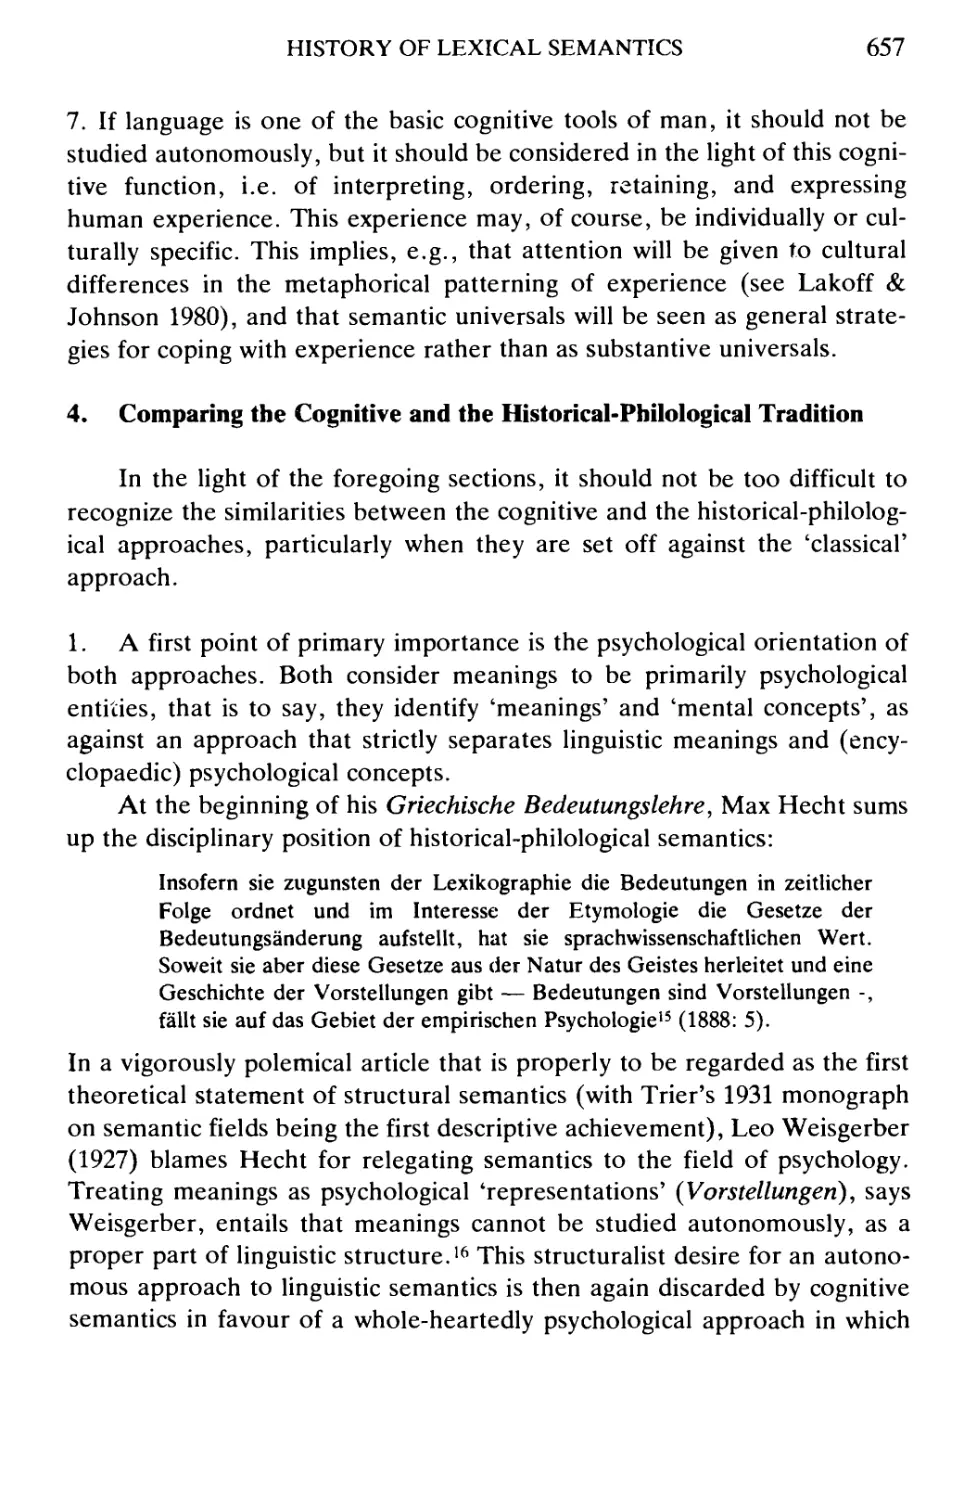 4. Comparing the Cognitive and the Historical-Philological Tradition